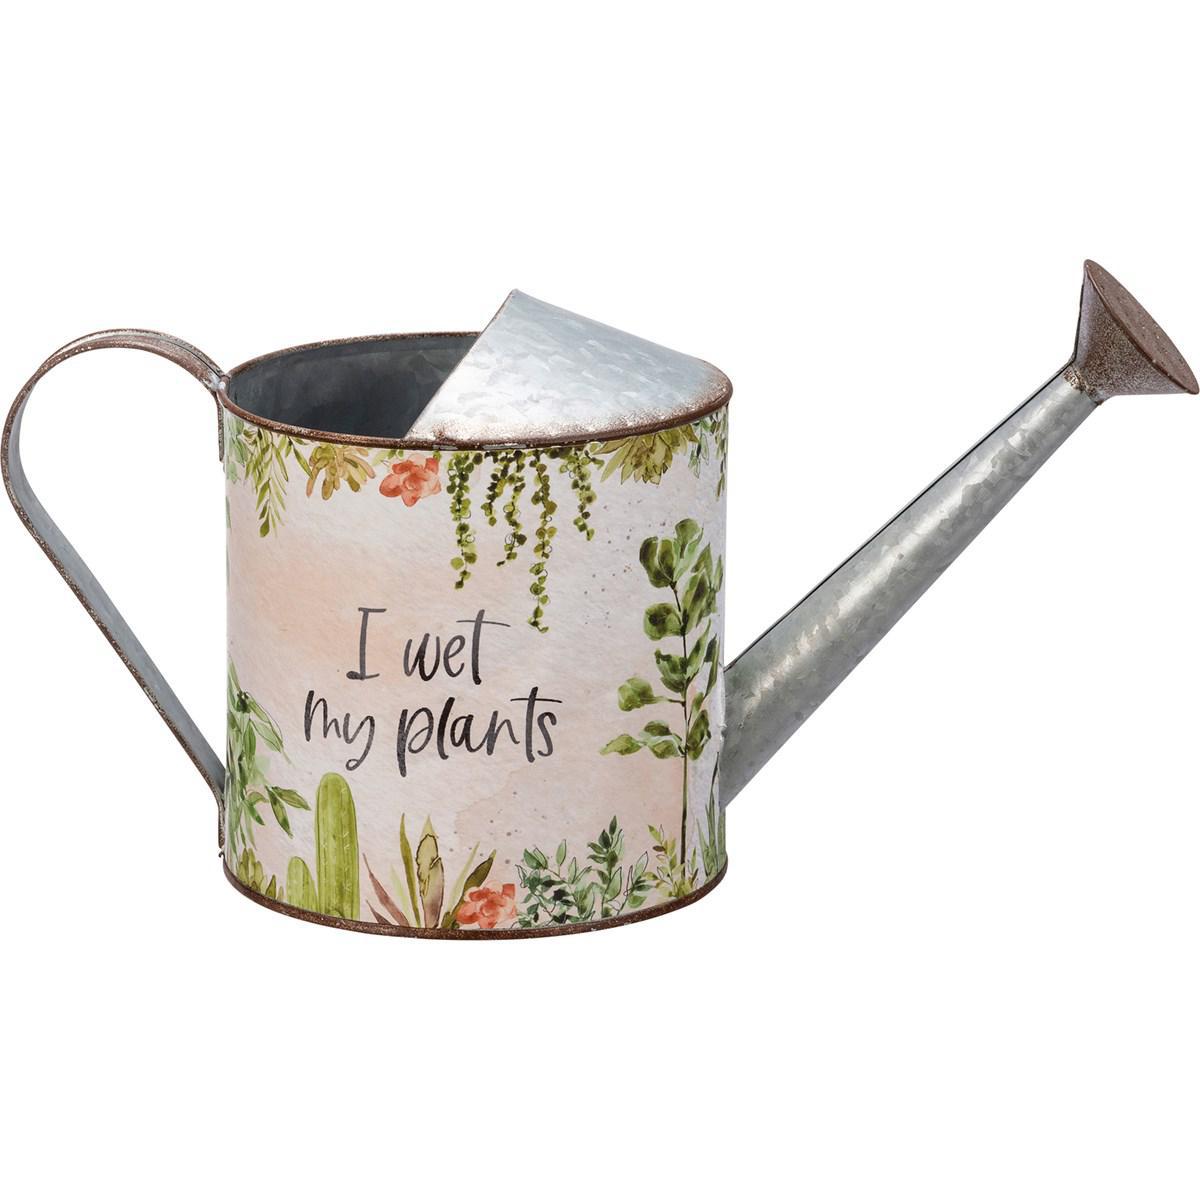 I Wet My Plants Watering Can: Sprinkle Some Humor